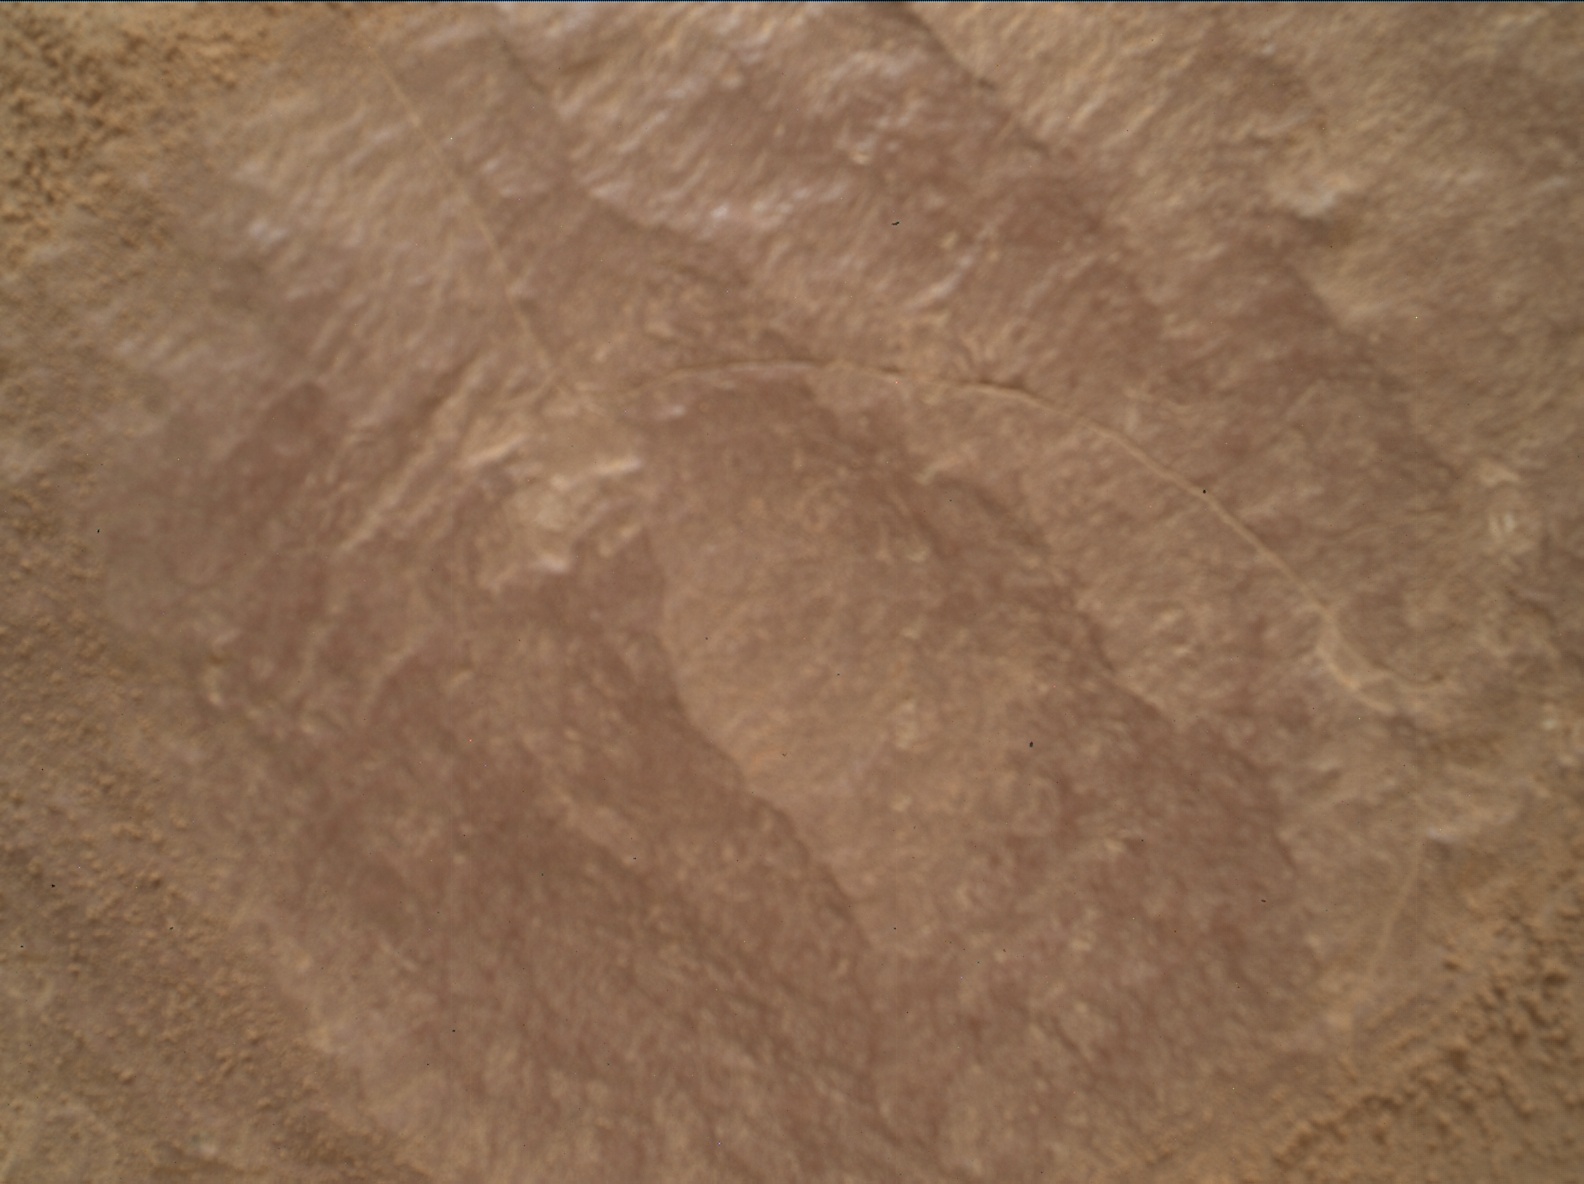 Nasa's Mars rover Curiosity acquired this image using its Mars Hand Lens Imager (MAHLI) on Sol 2301